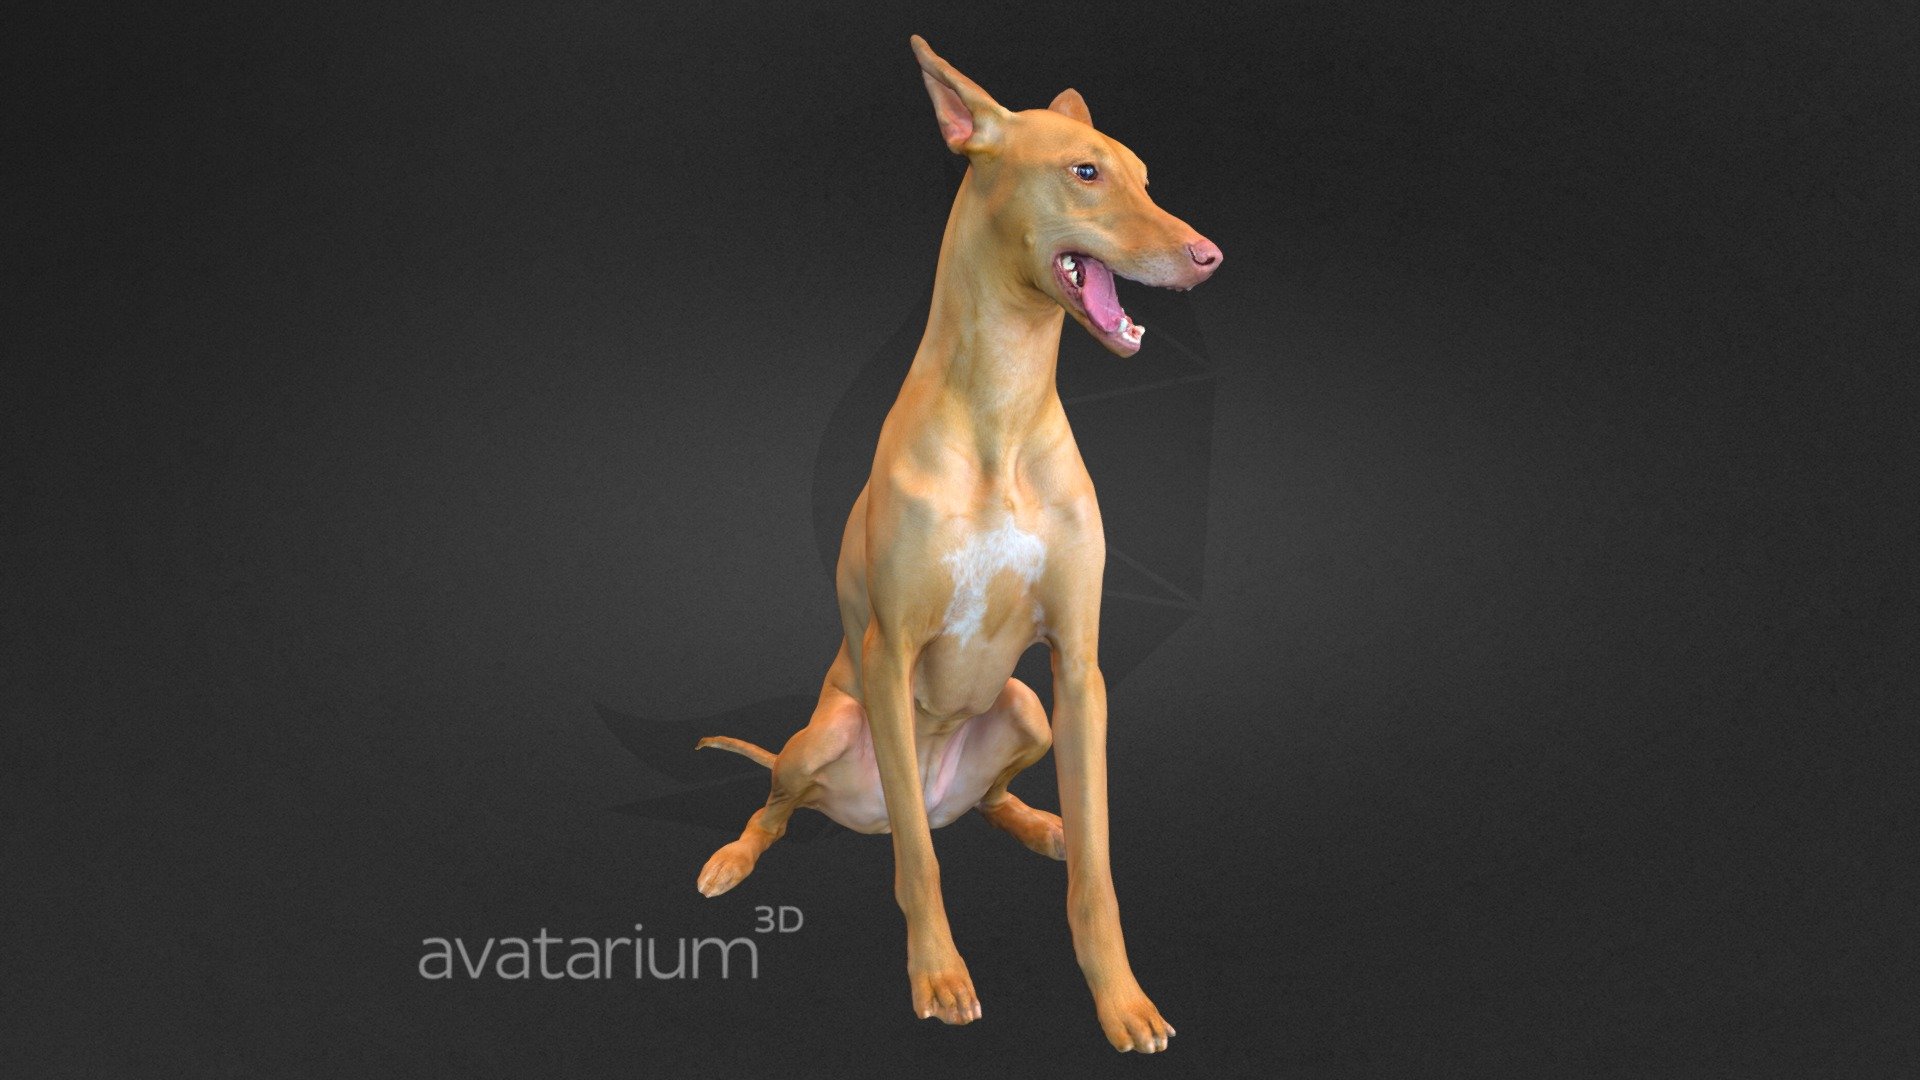 Pharaoh Hound Dog 3d captured and cleaned up in zBrush. Highly detailed polygonal model. Captured using Photogrammetry 3d model